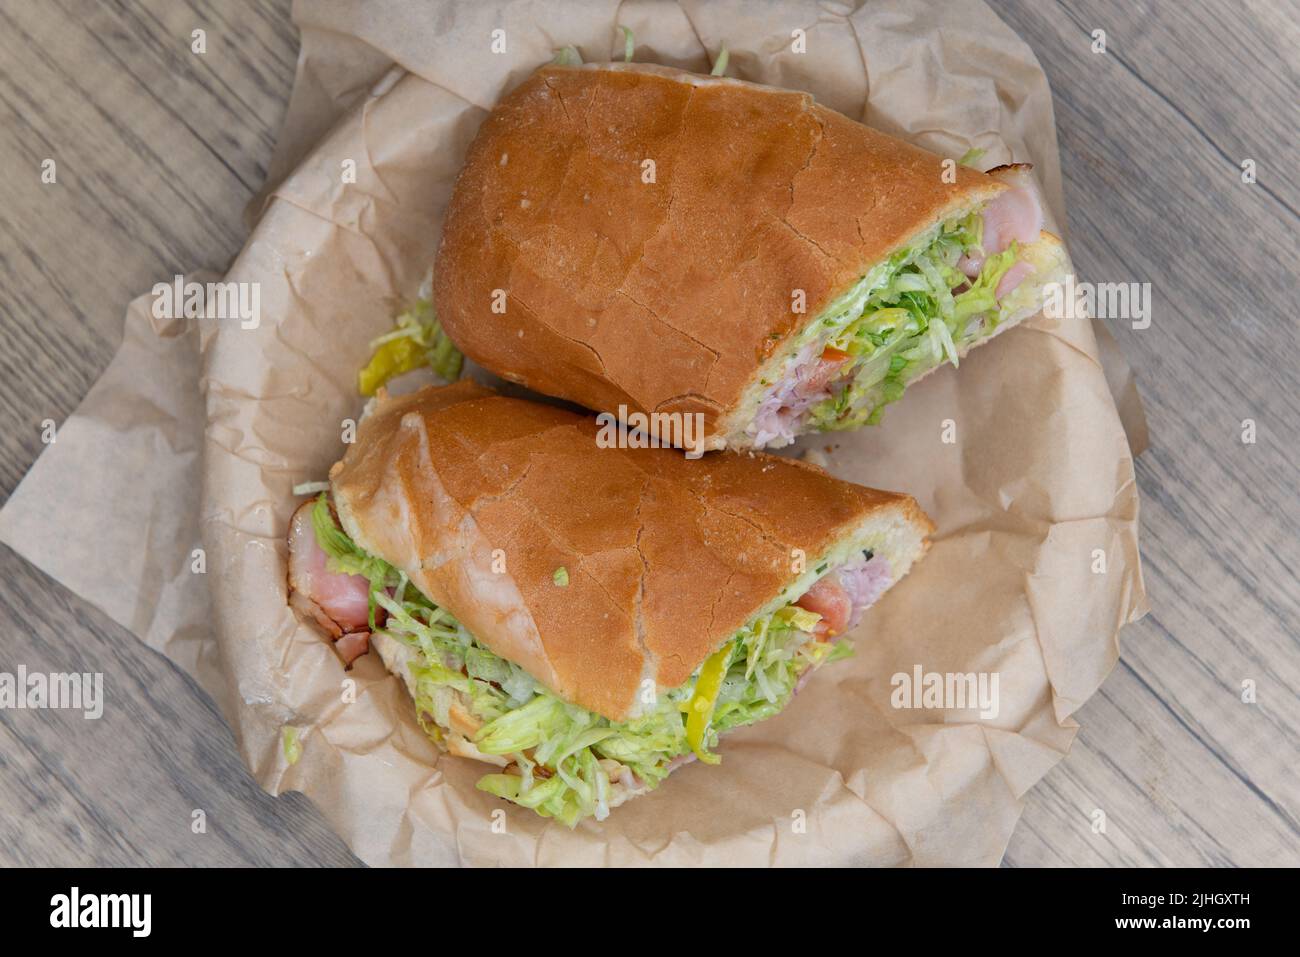 Overhead view of loaded ham sandwich with provolone cheese, tomato, mayo, and red onion inside an Italian Roll for a hearty lunch meal. Stock Photo